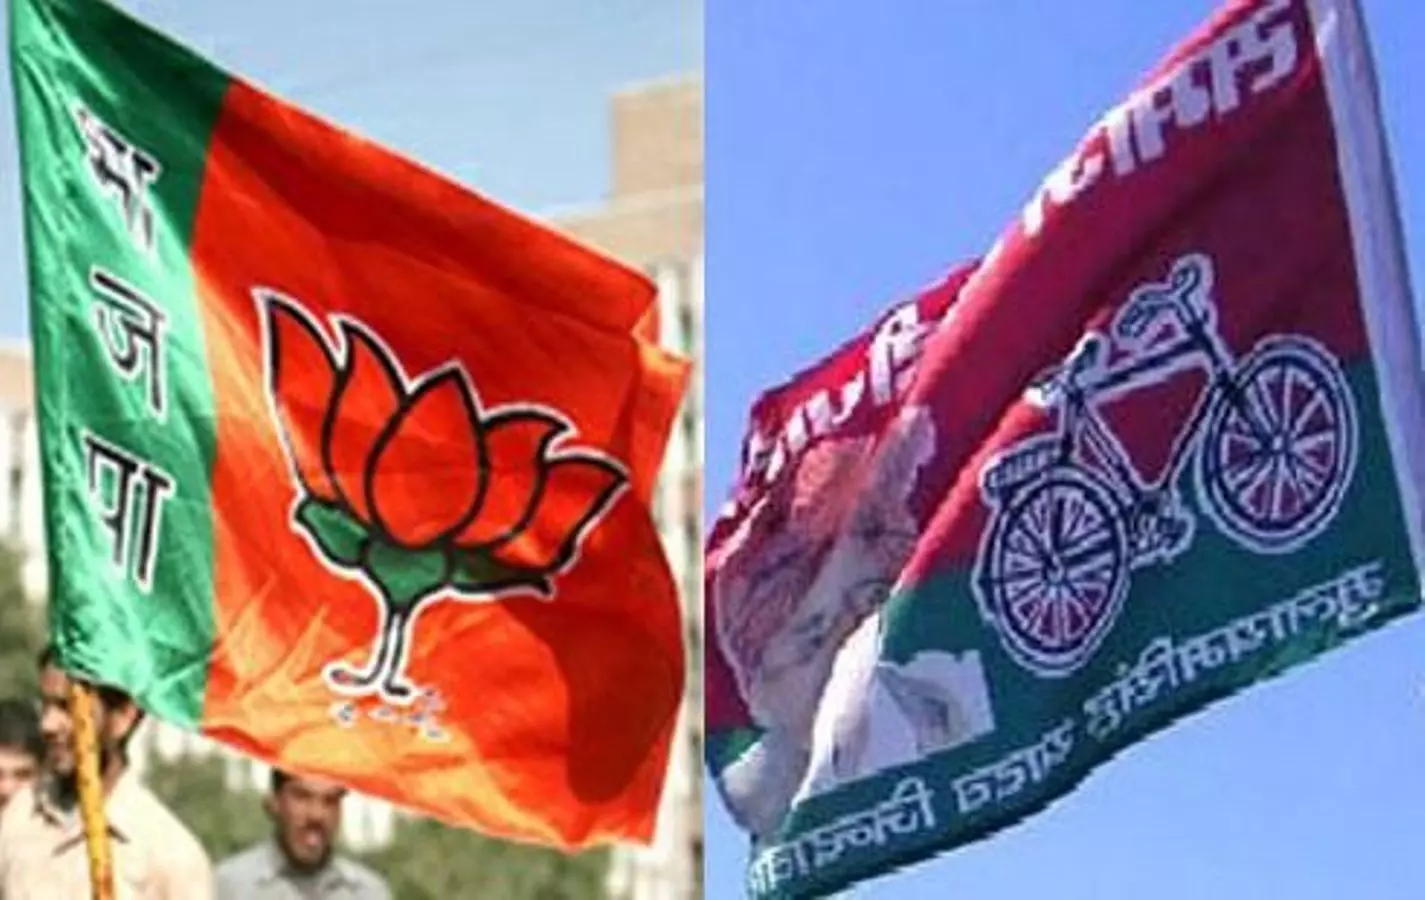 SP-BJP will be face to face in elections